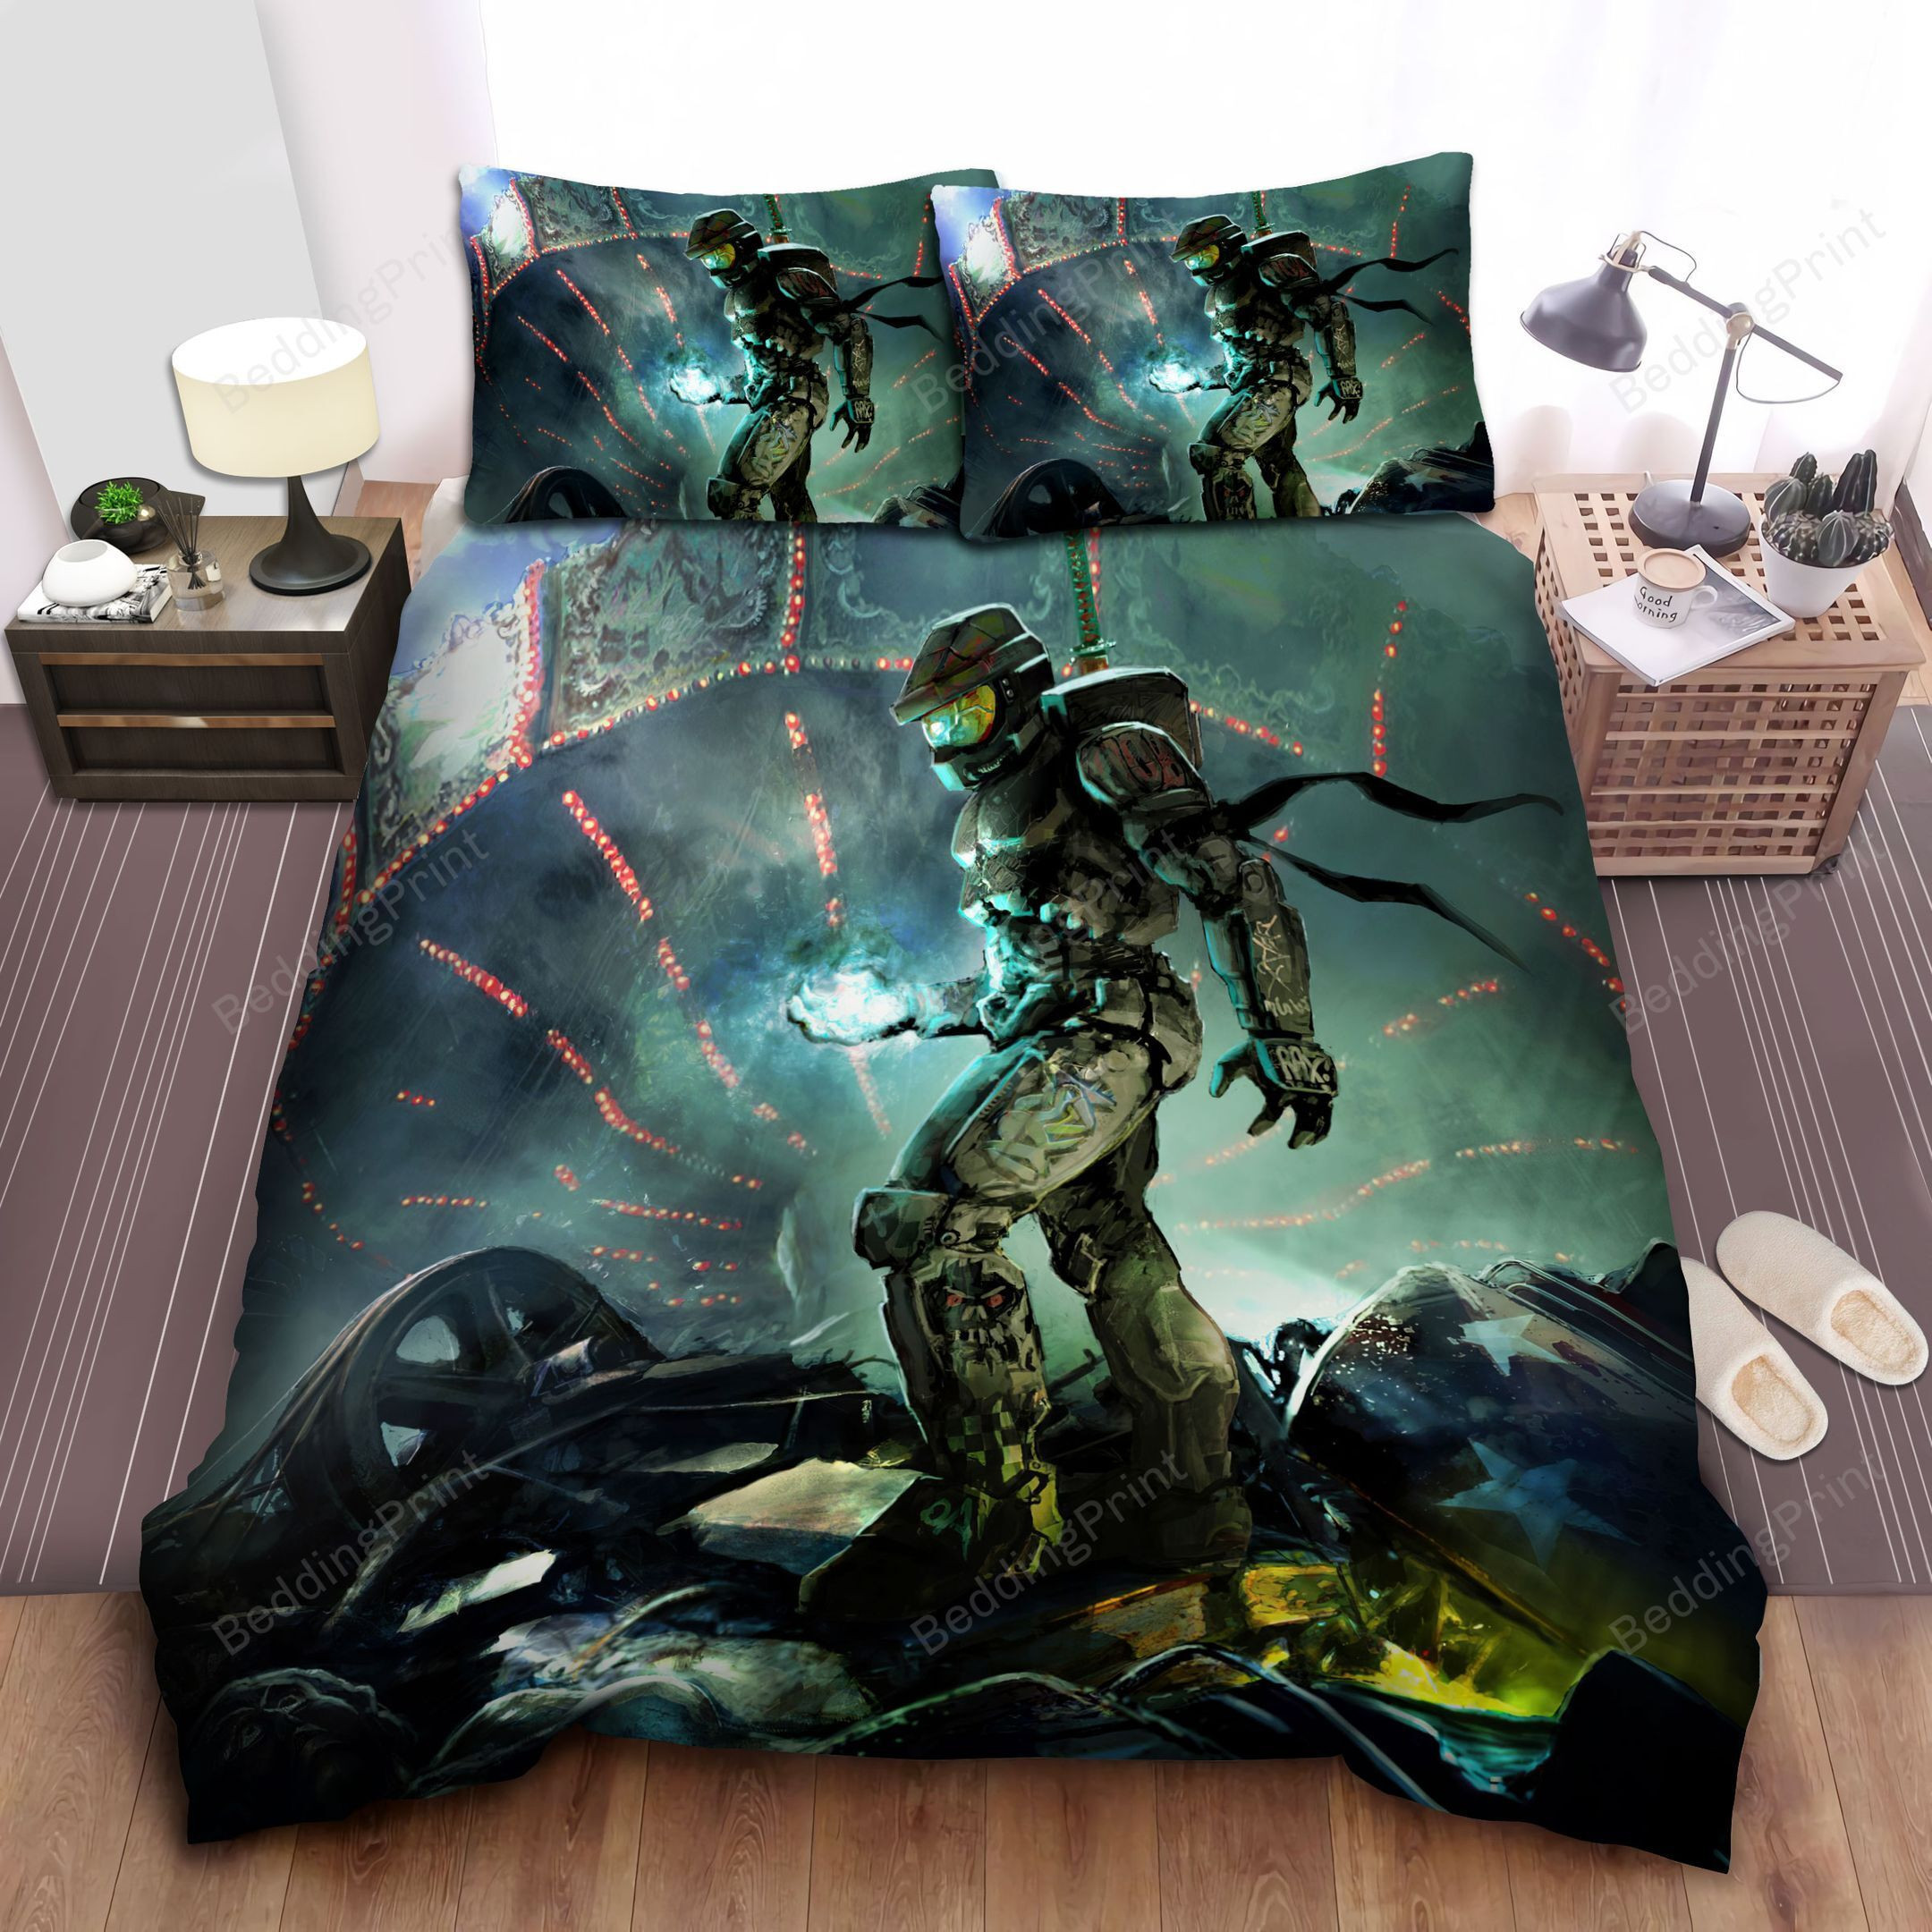 Halo Reach Bed Sheets Duvet Cover Bedding Sets Homefavo 2902